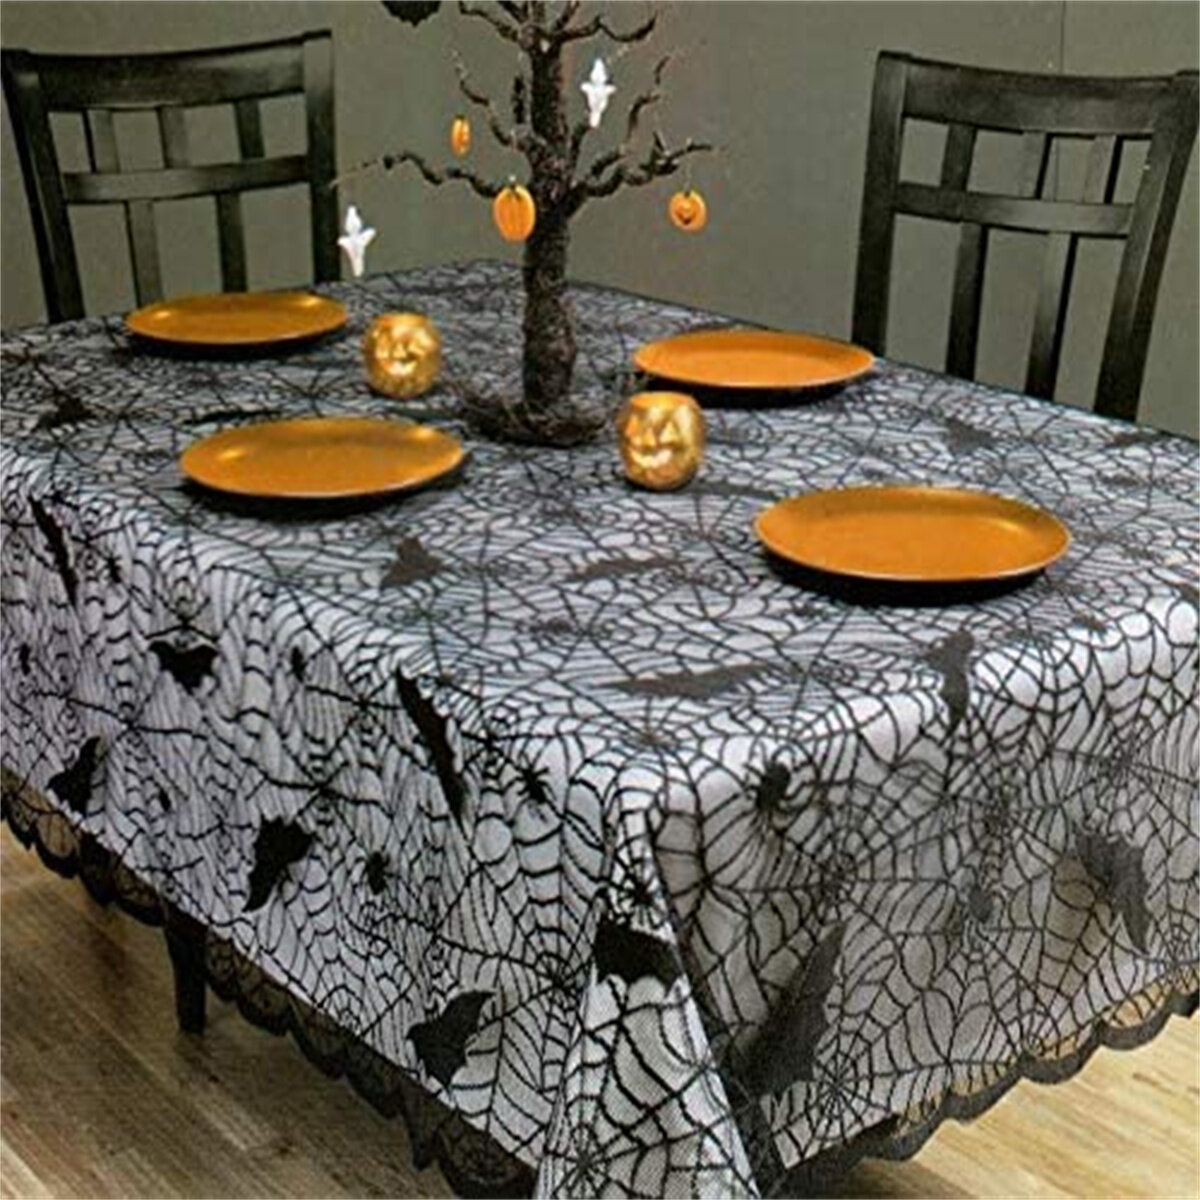 Spider Web Polyester Tablecloth Halloween Home Decor Table Cover Lace Curtain 